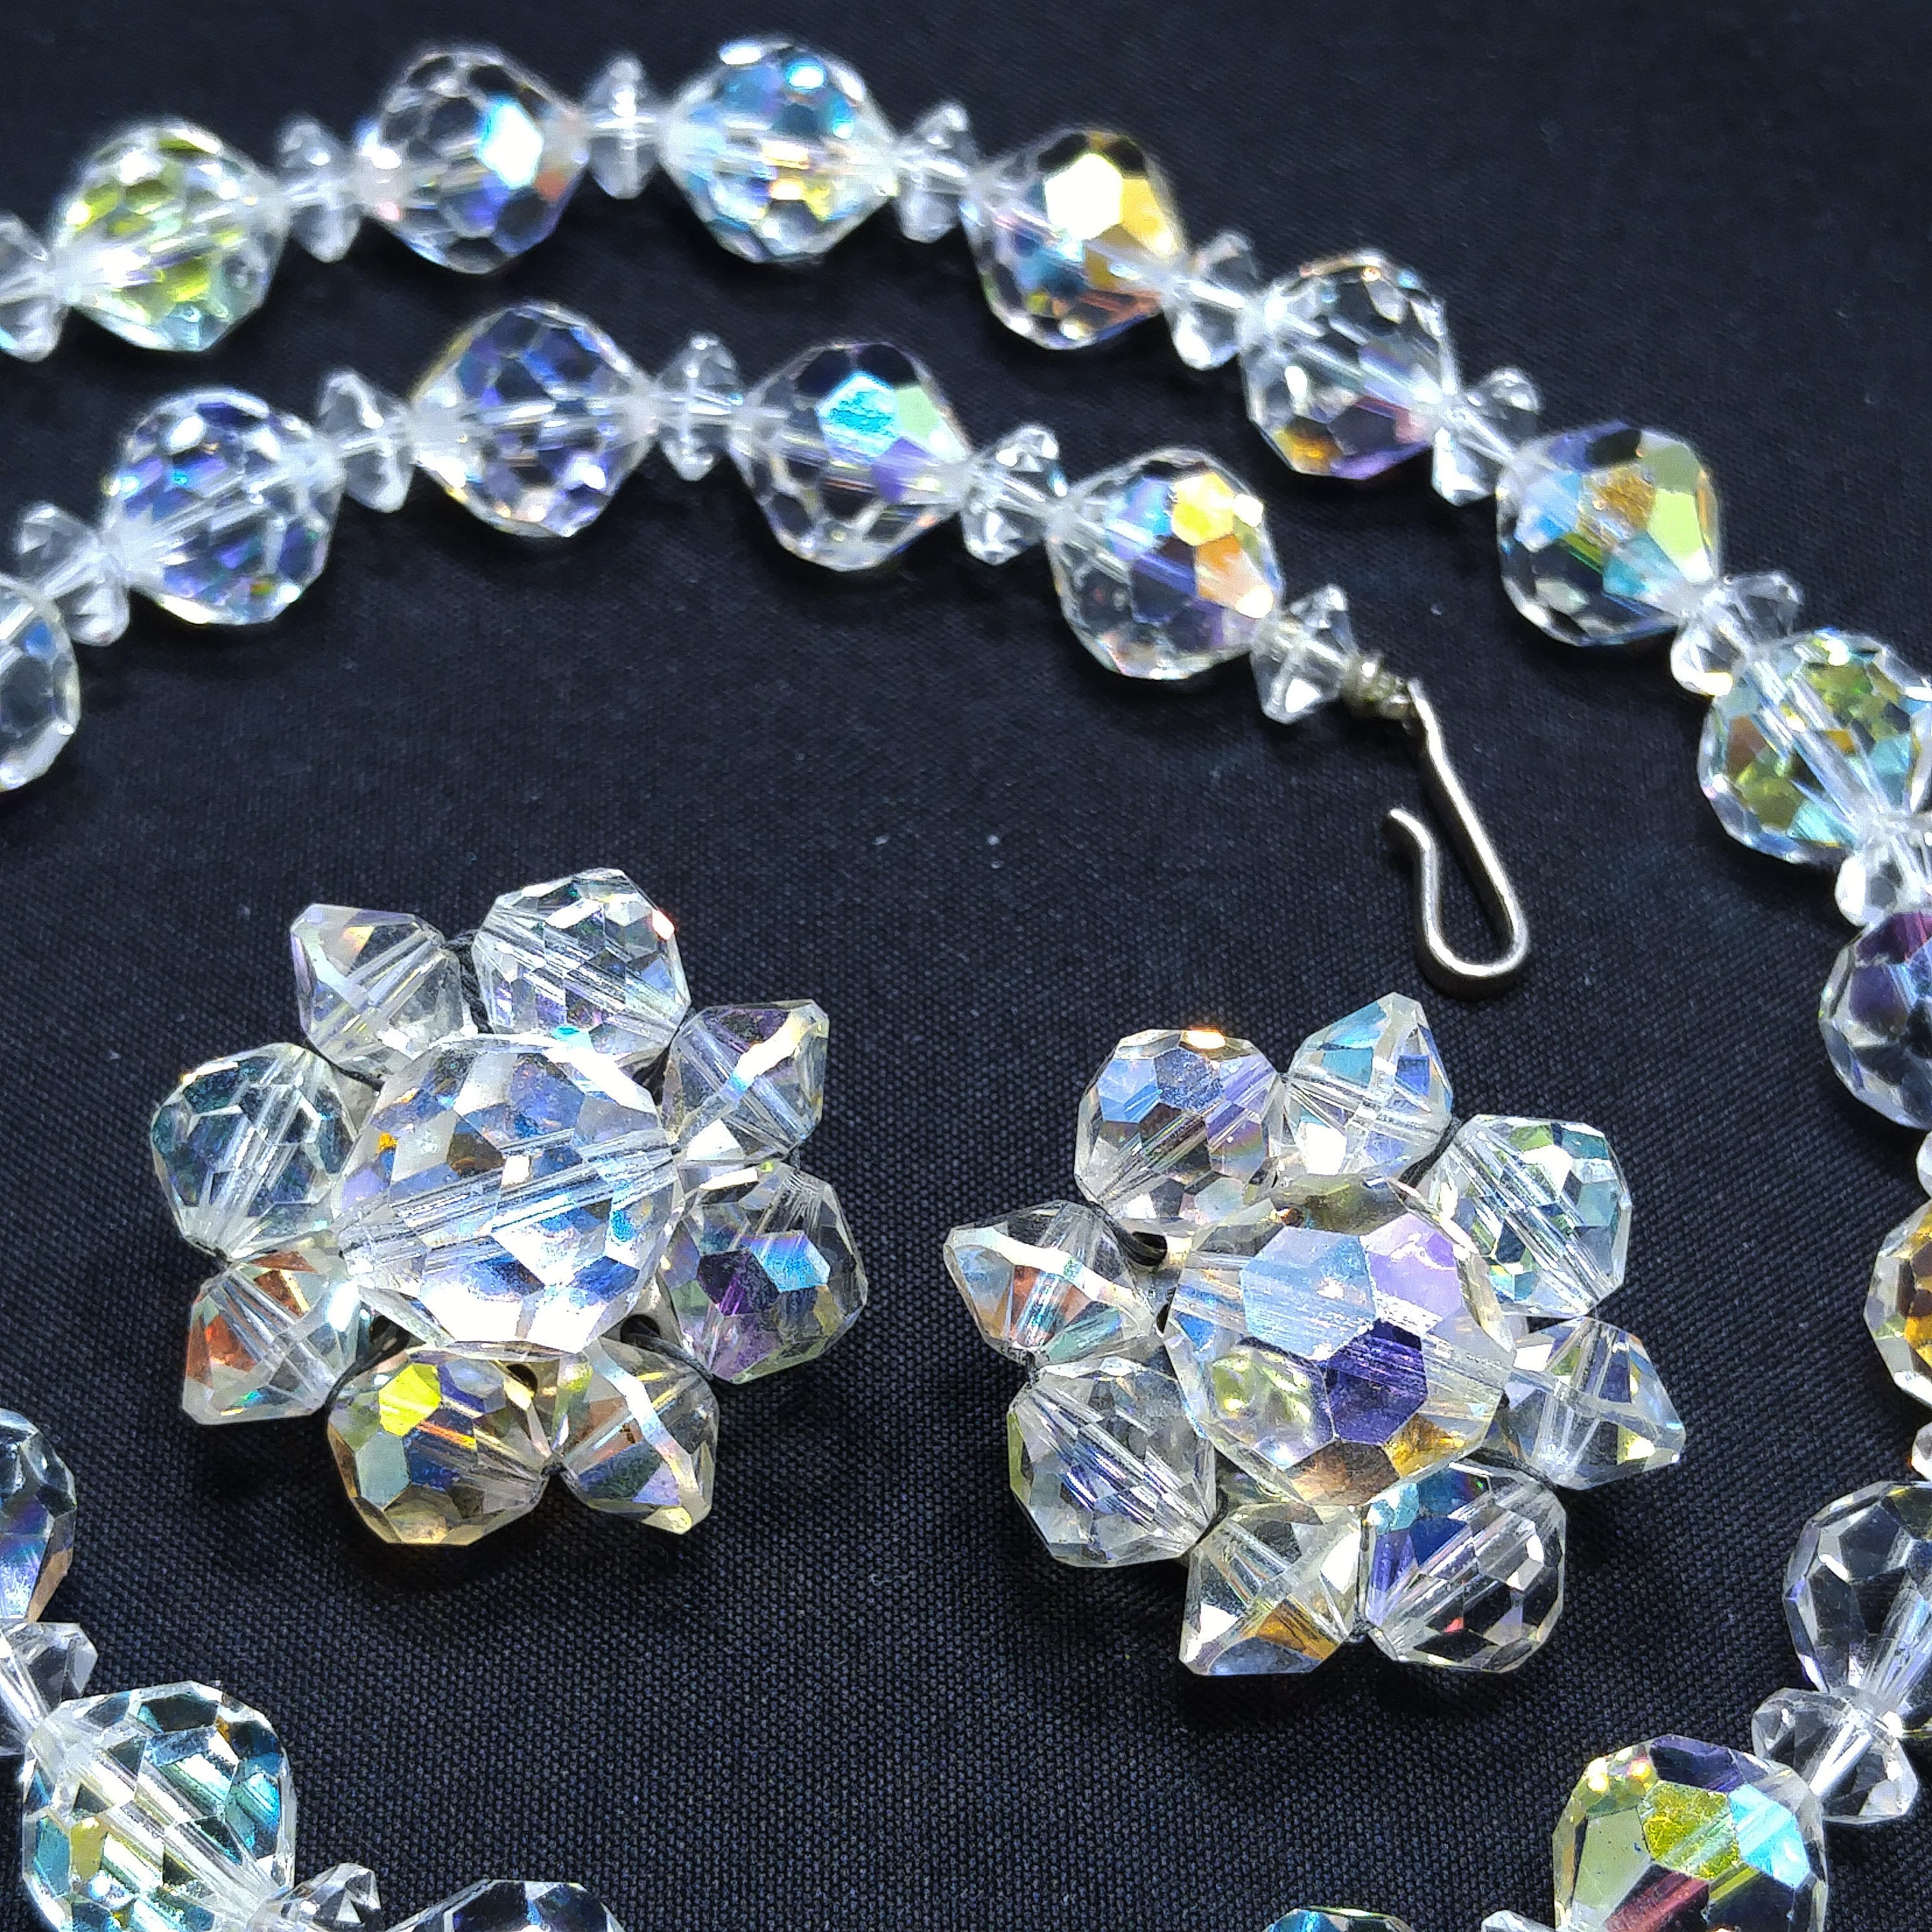 & Etsy Beaded Beads, Jewelry Austrian Set, - 1960s Vintage Clear Aurora Necklace Borealis Faceted Crystal Earring